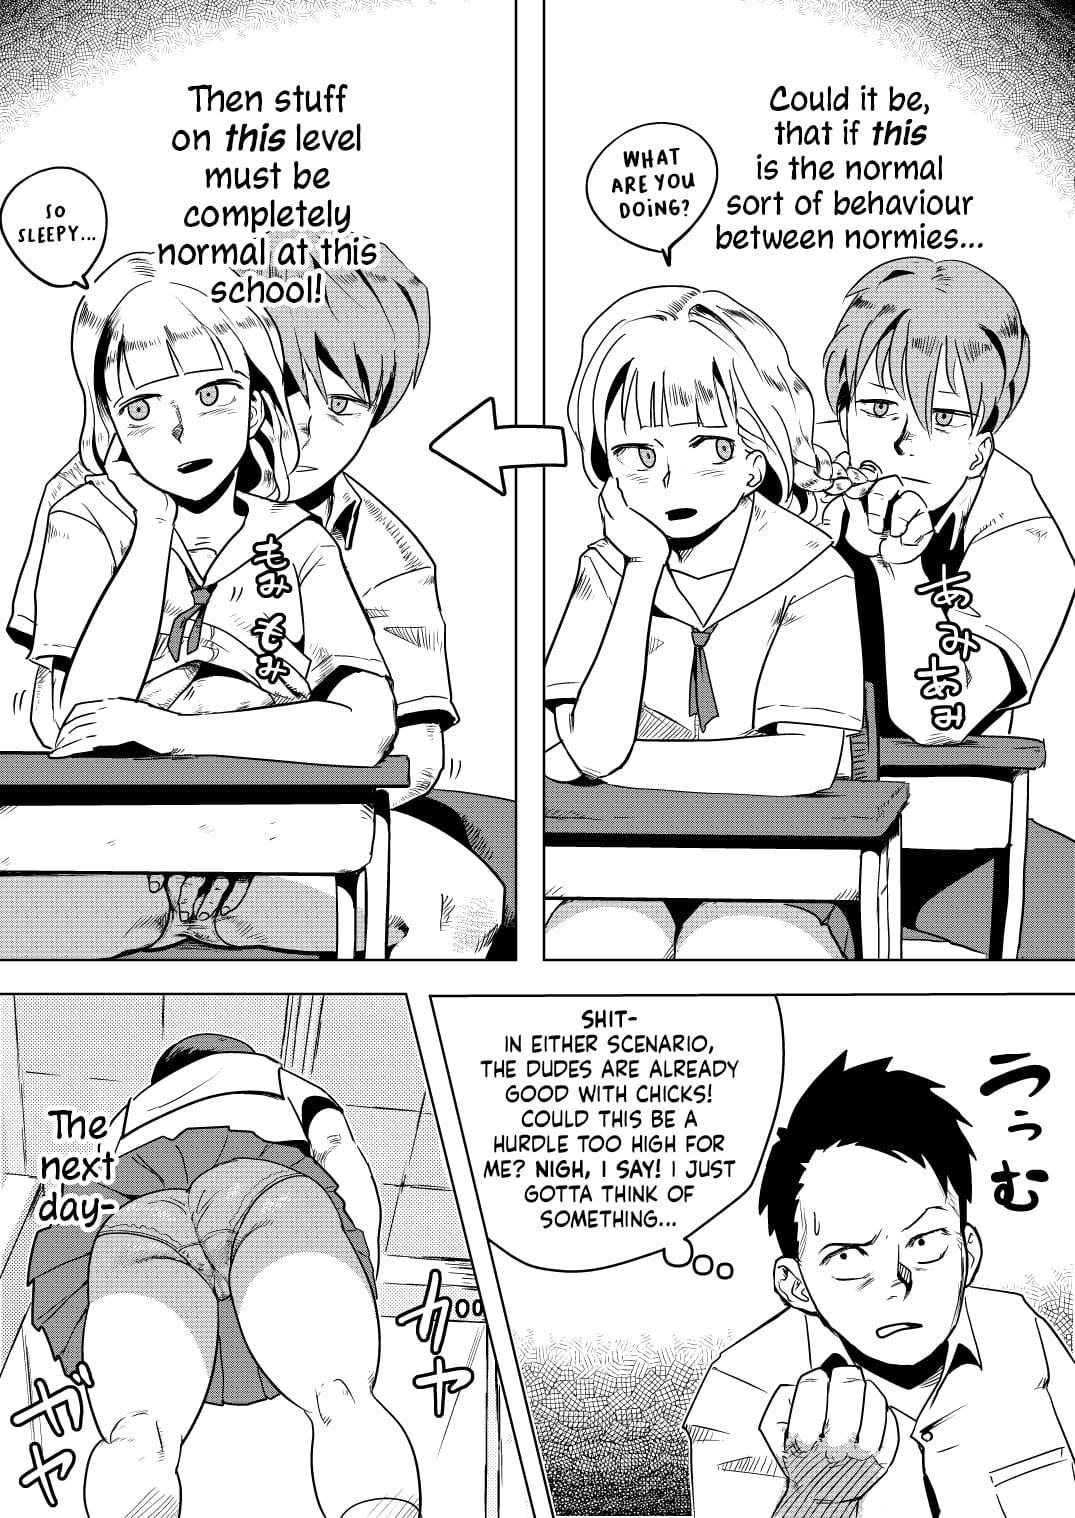 Off Do sukebe gakkyū de joshi to nakayoku naru hōhō | How To Get Along With The Girls From St. Simp Private School - Original Blond - Page 7